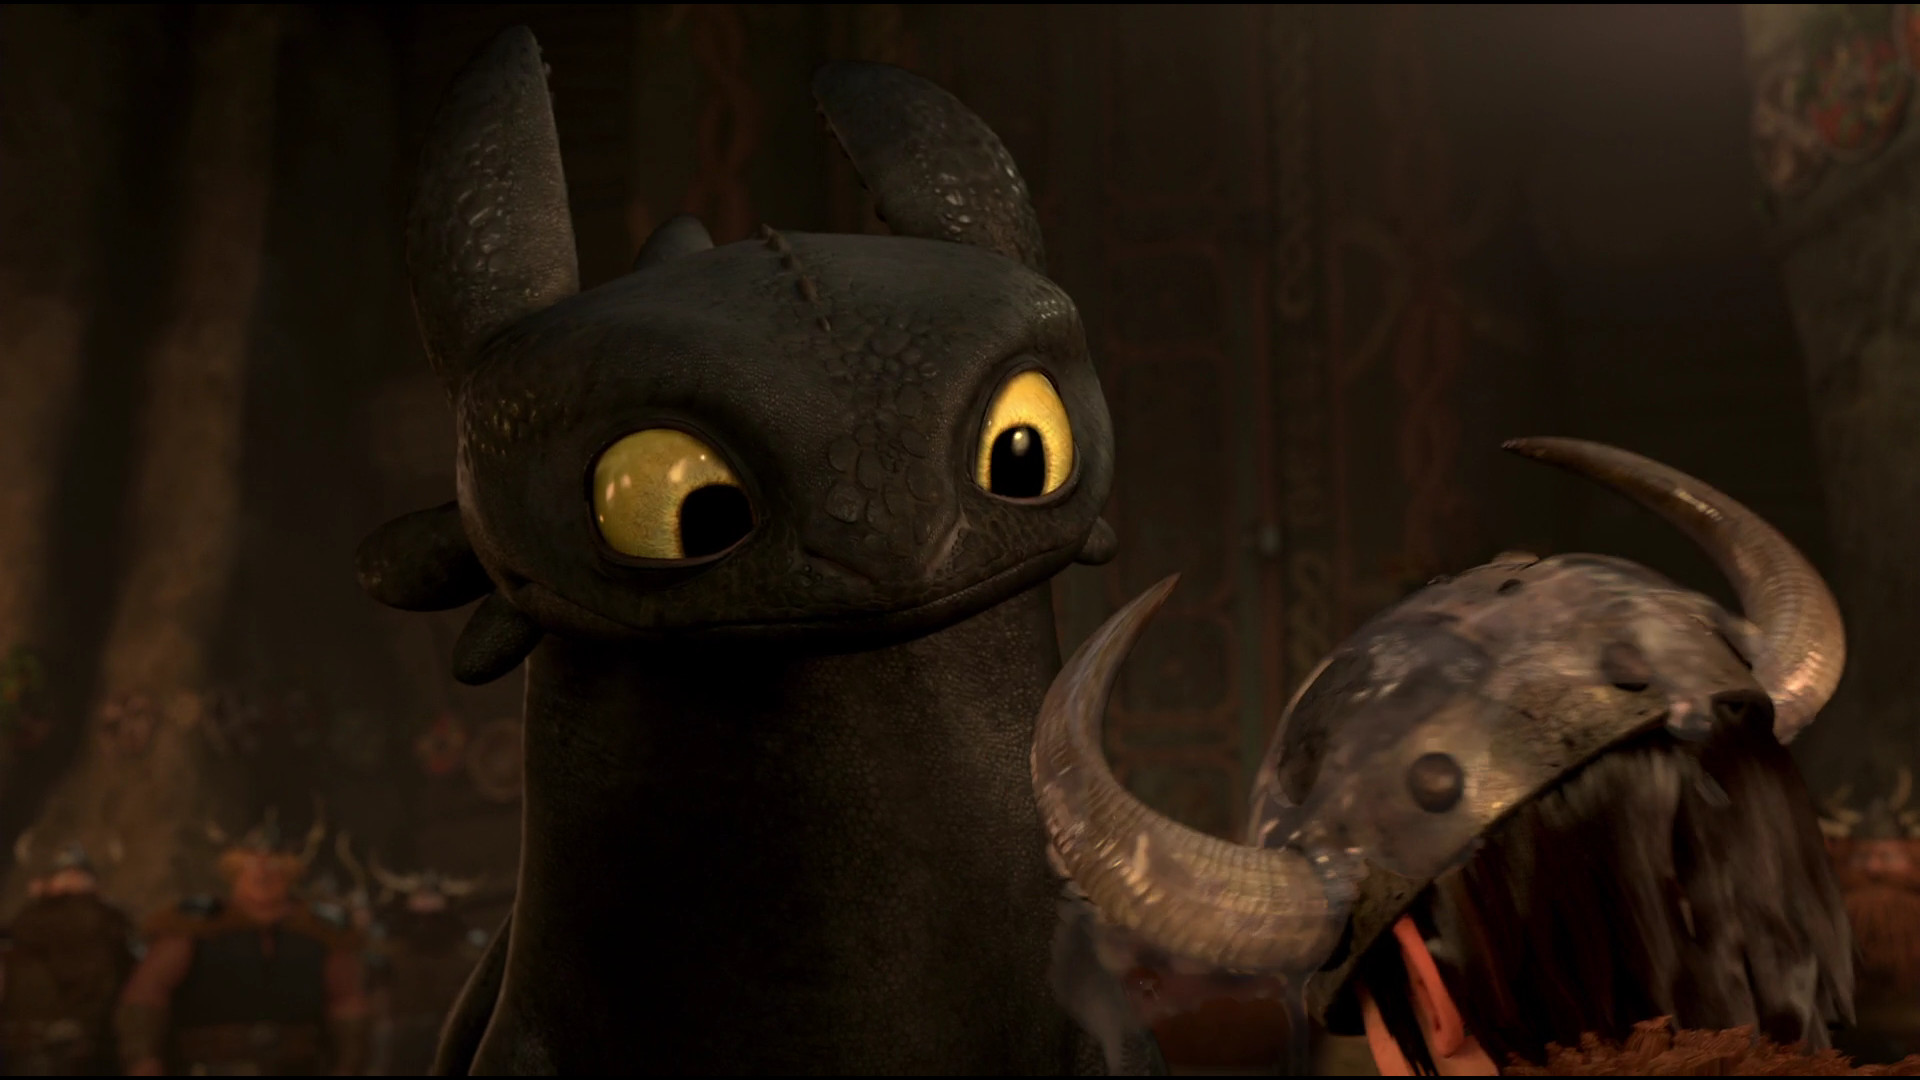 Cute Toothless Wallpaper Toothless by dashiesparkle